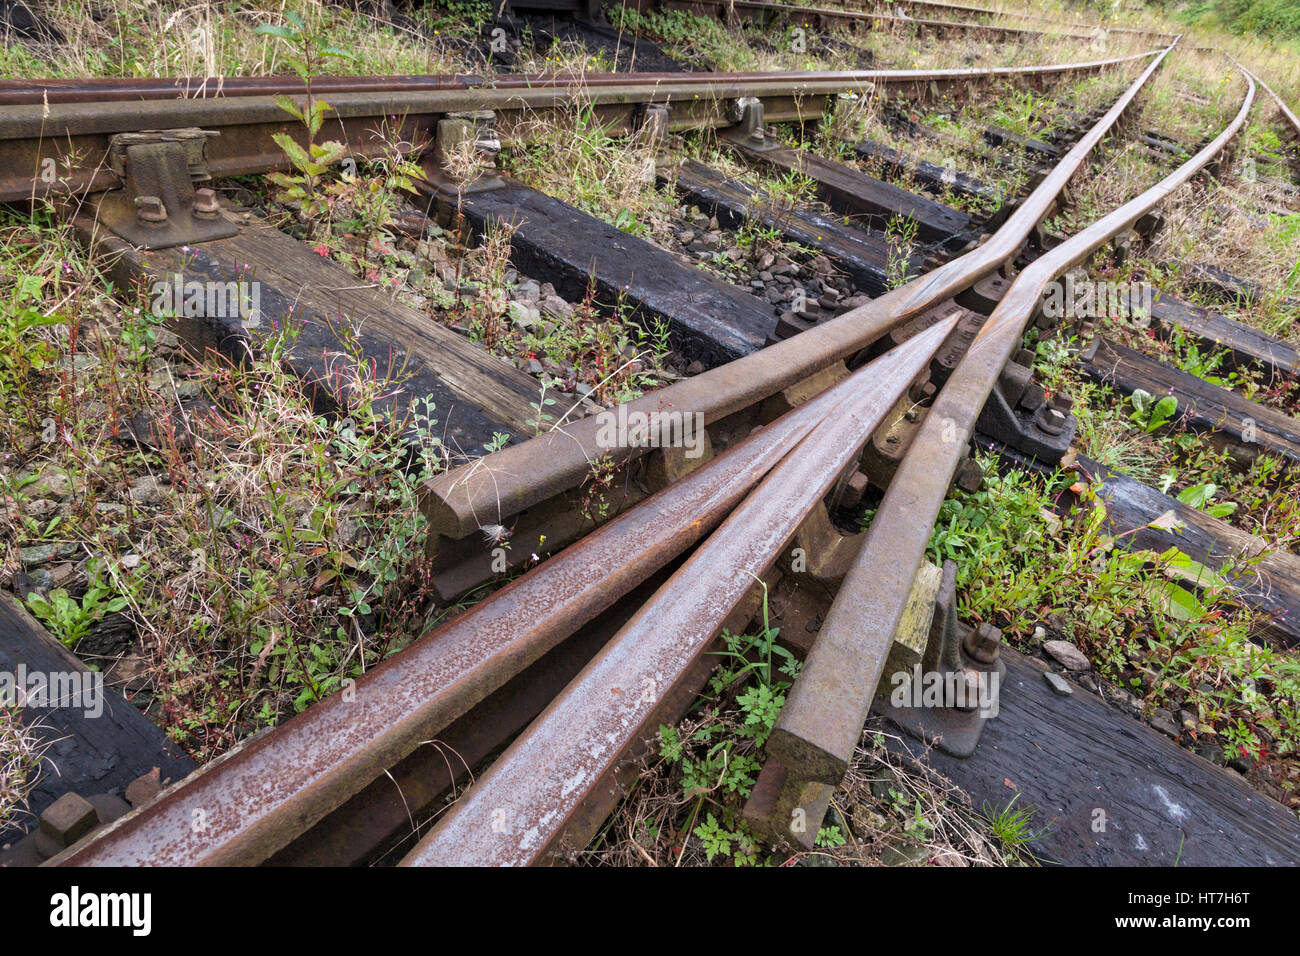 Weeds and plants growing up around old rusty railway points or switching, England, UK Stock Photo